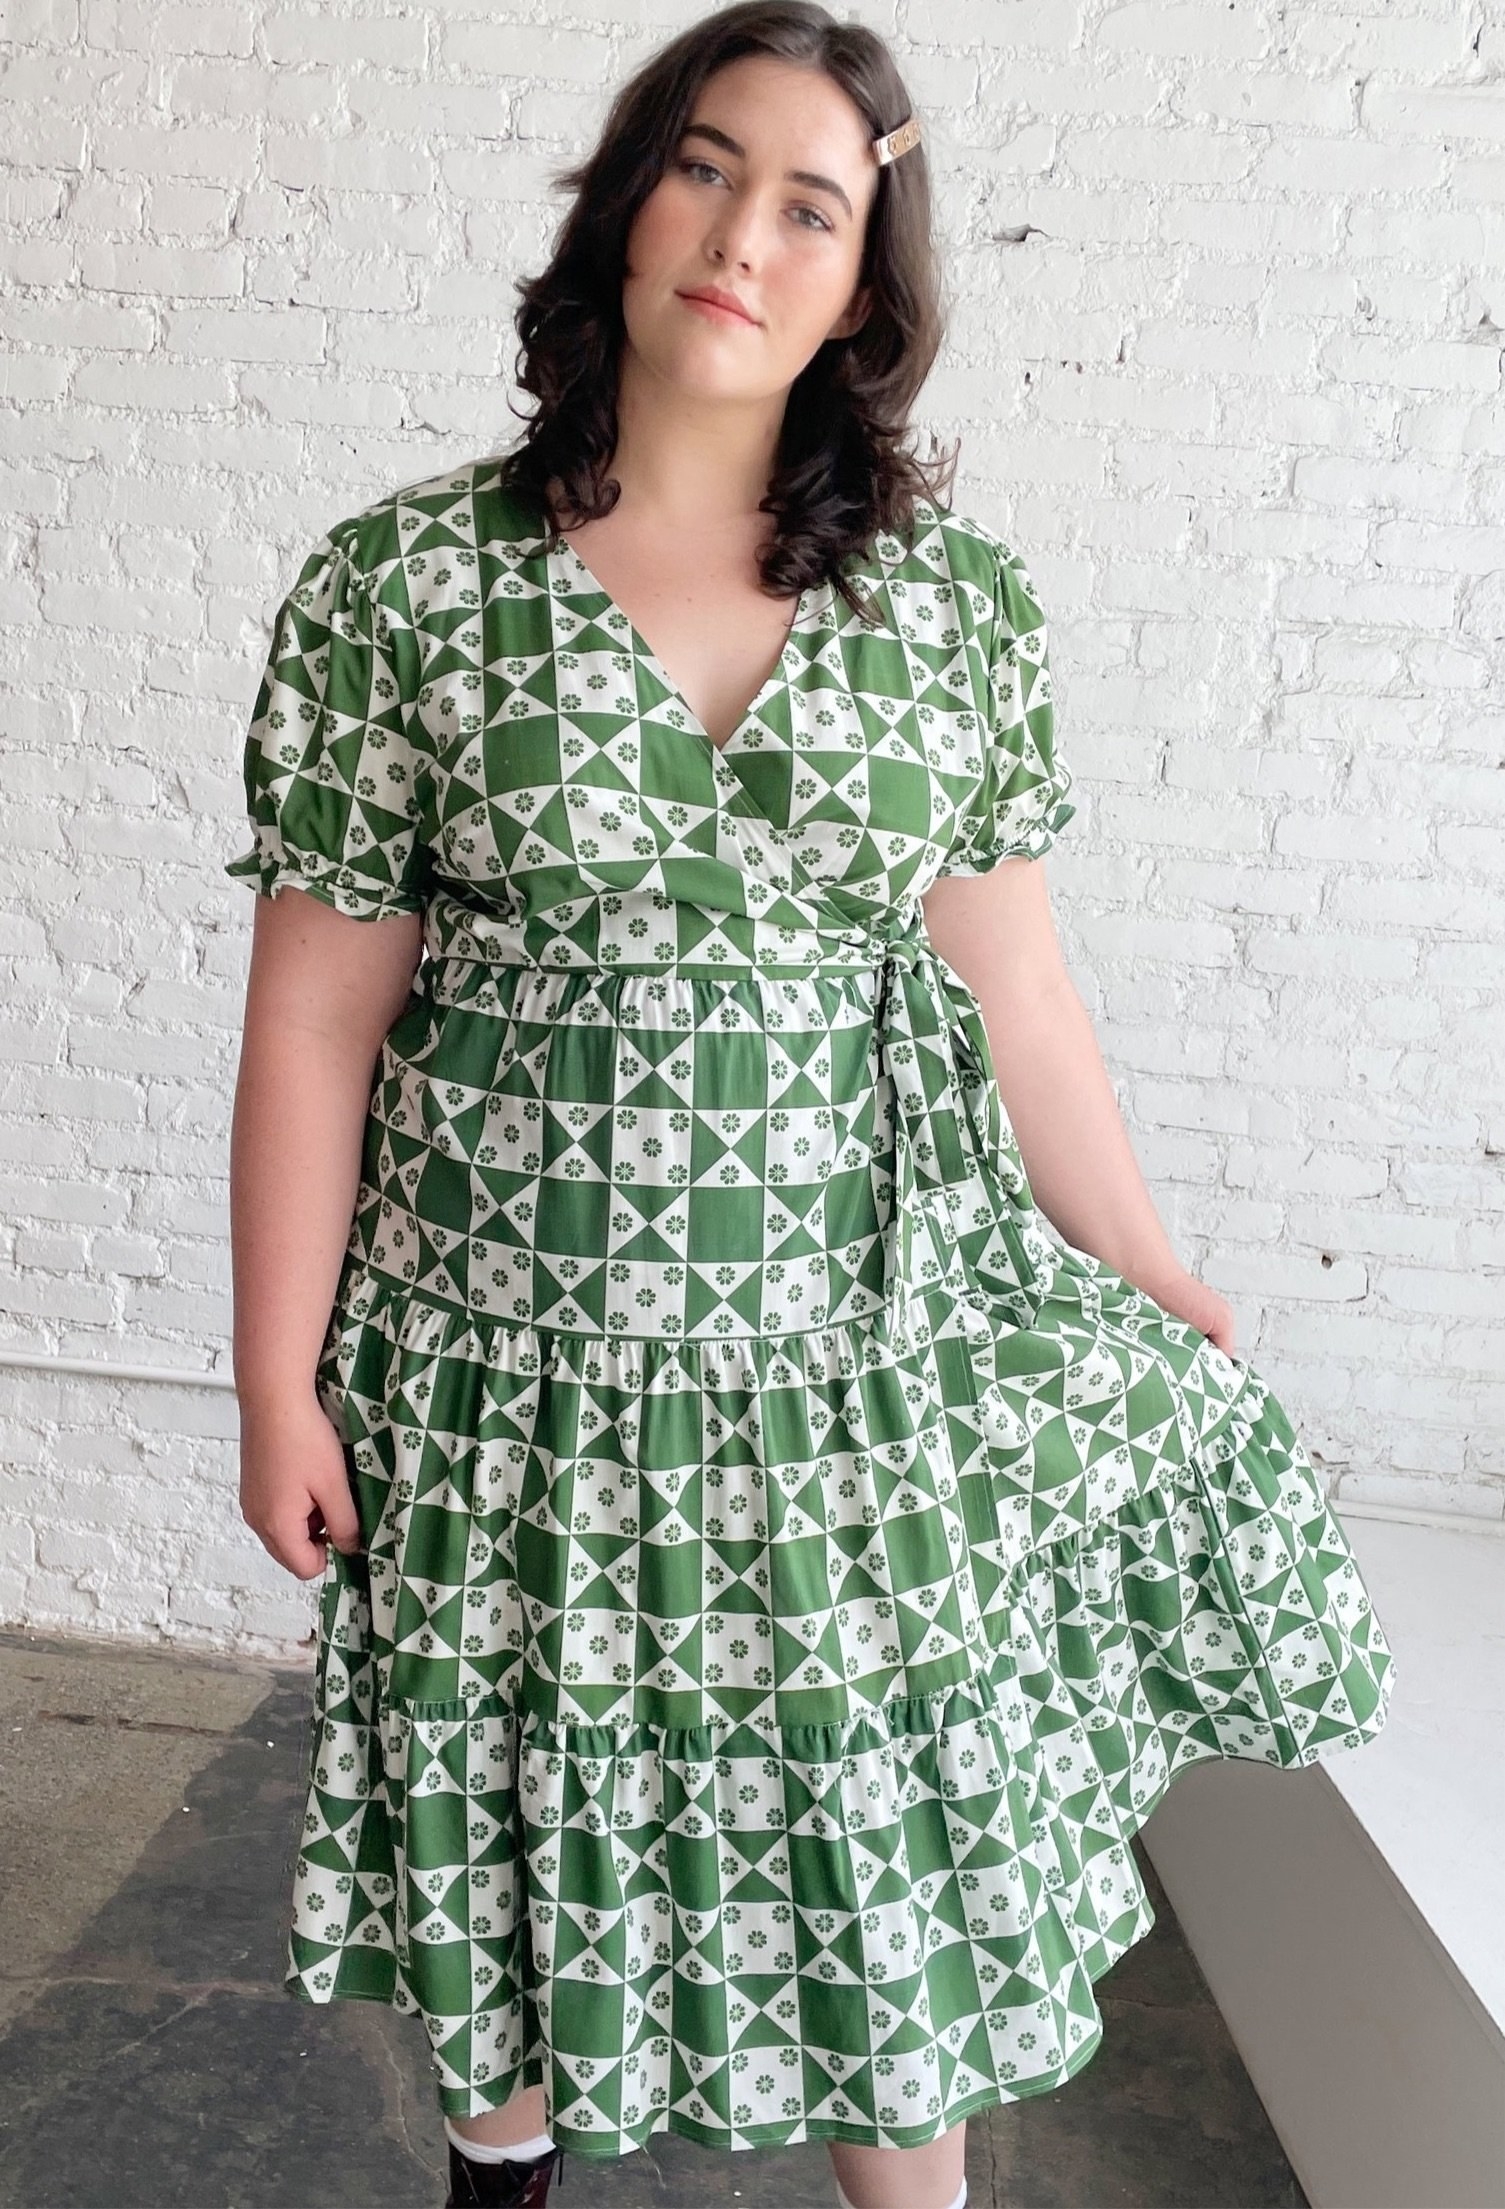 model wearing the puff-sleeve wrap dress with green and white quilt-like pattern and small green flowers all over it